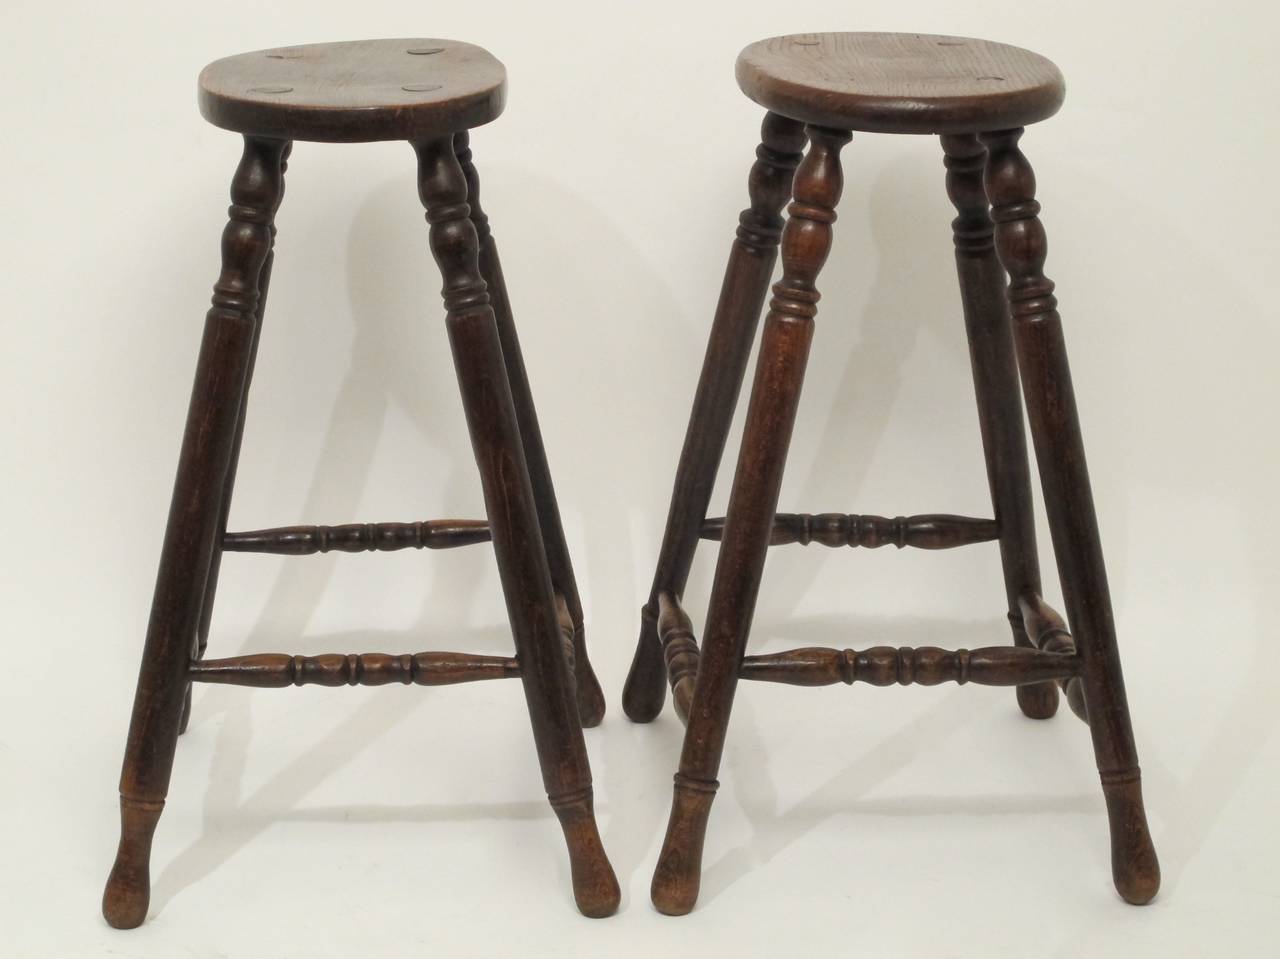 A slightly unmatched (one seat is a bit more oval than the other) pair of elm and yew wood pub stools with turned flared legs and turned dowel supports.